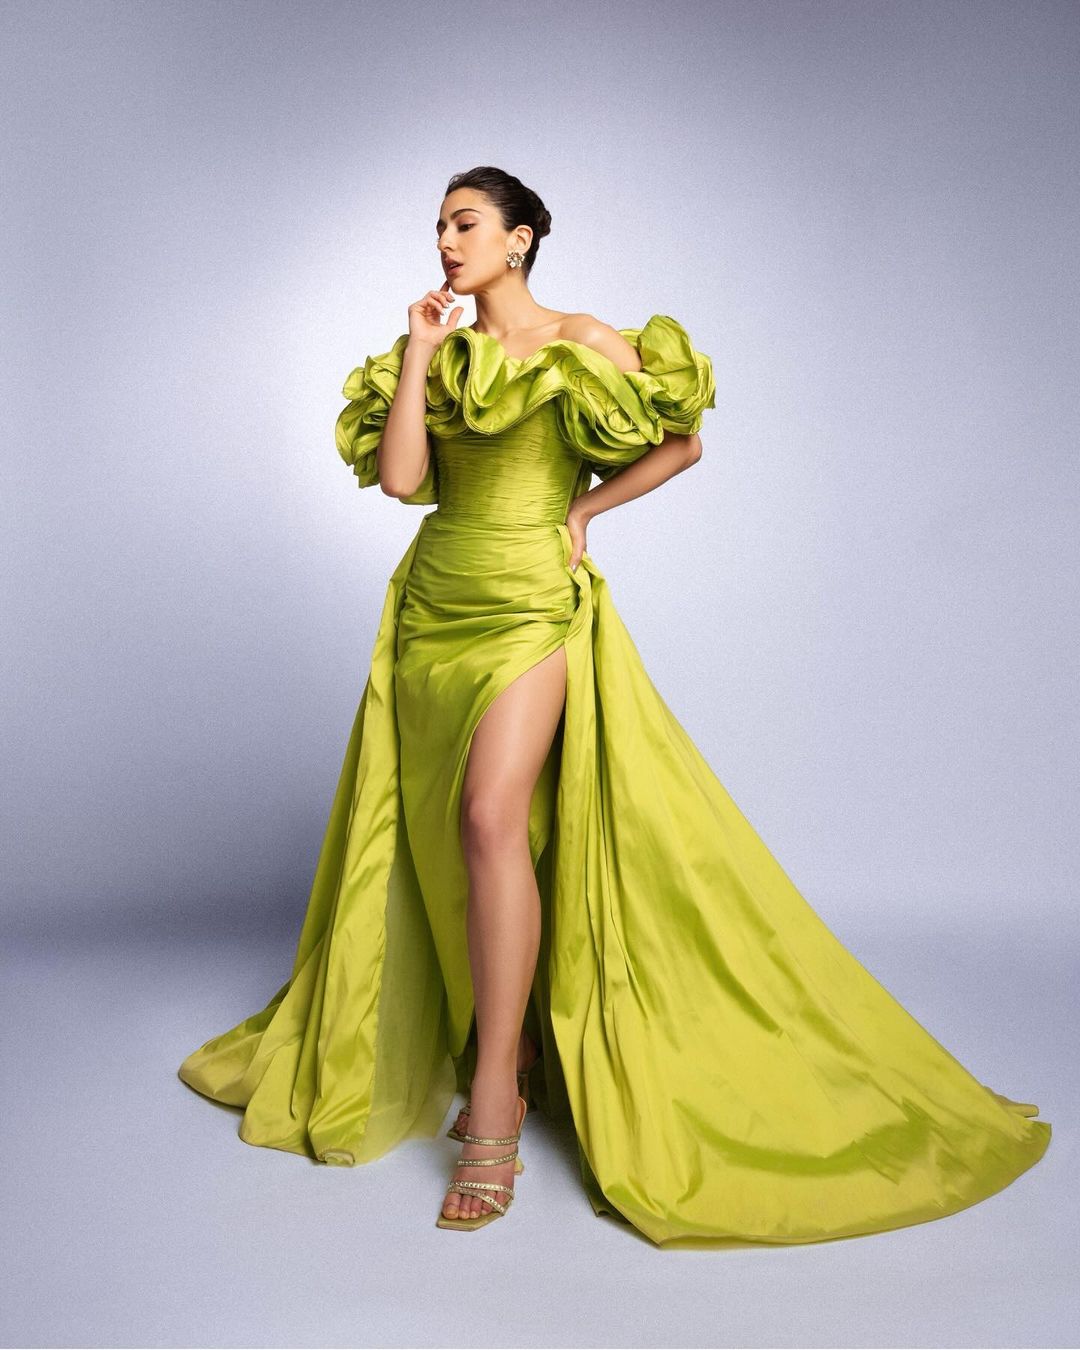 Sara Ali Khan Adds a Splash of Springtime Glamour in a Neon Green Off-Shoulder  Gown for a Photoshoot (View Pics) | 👗 LatestLY